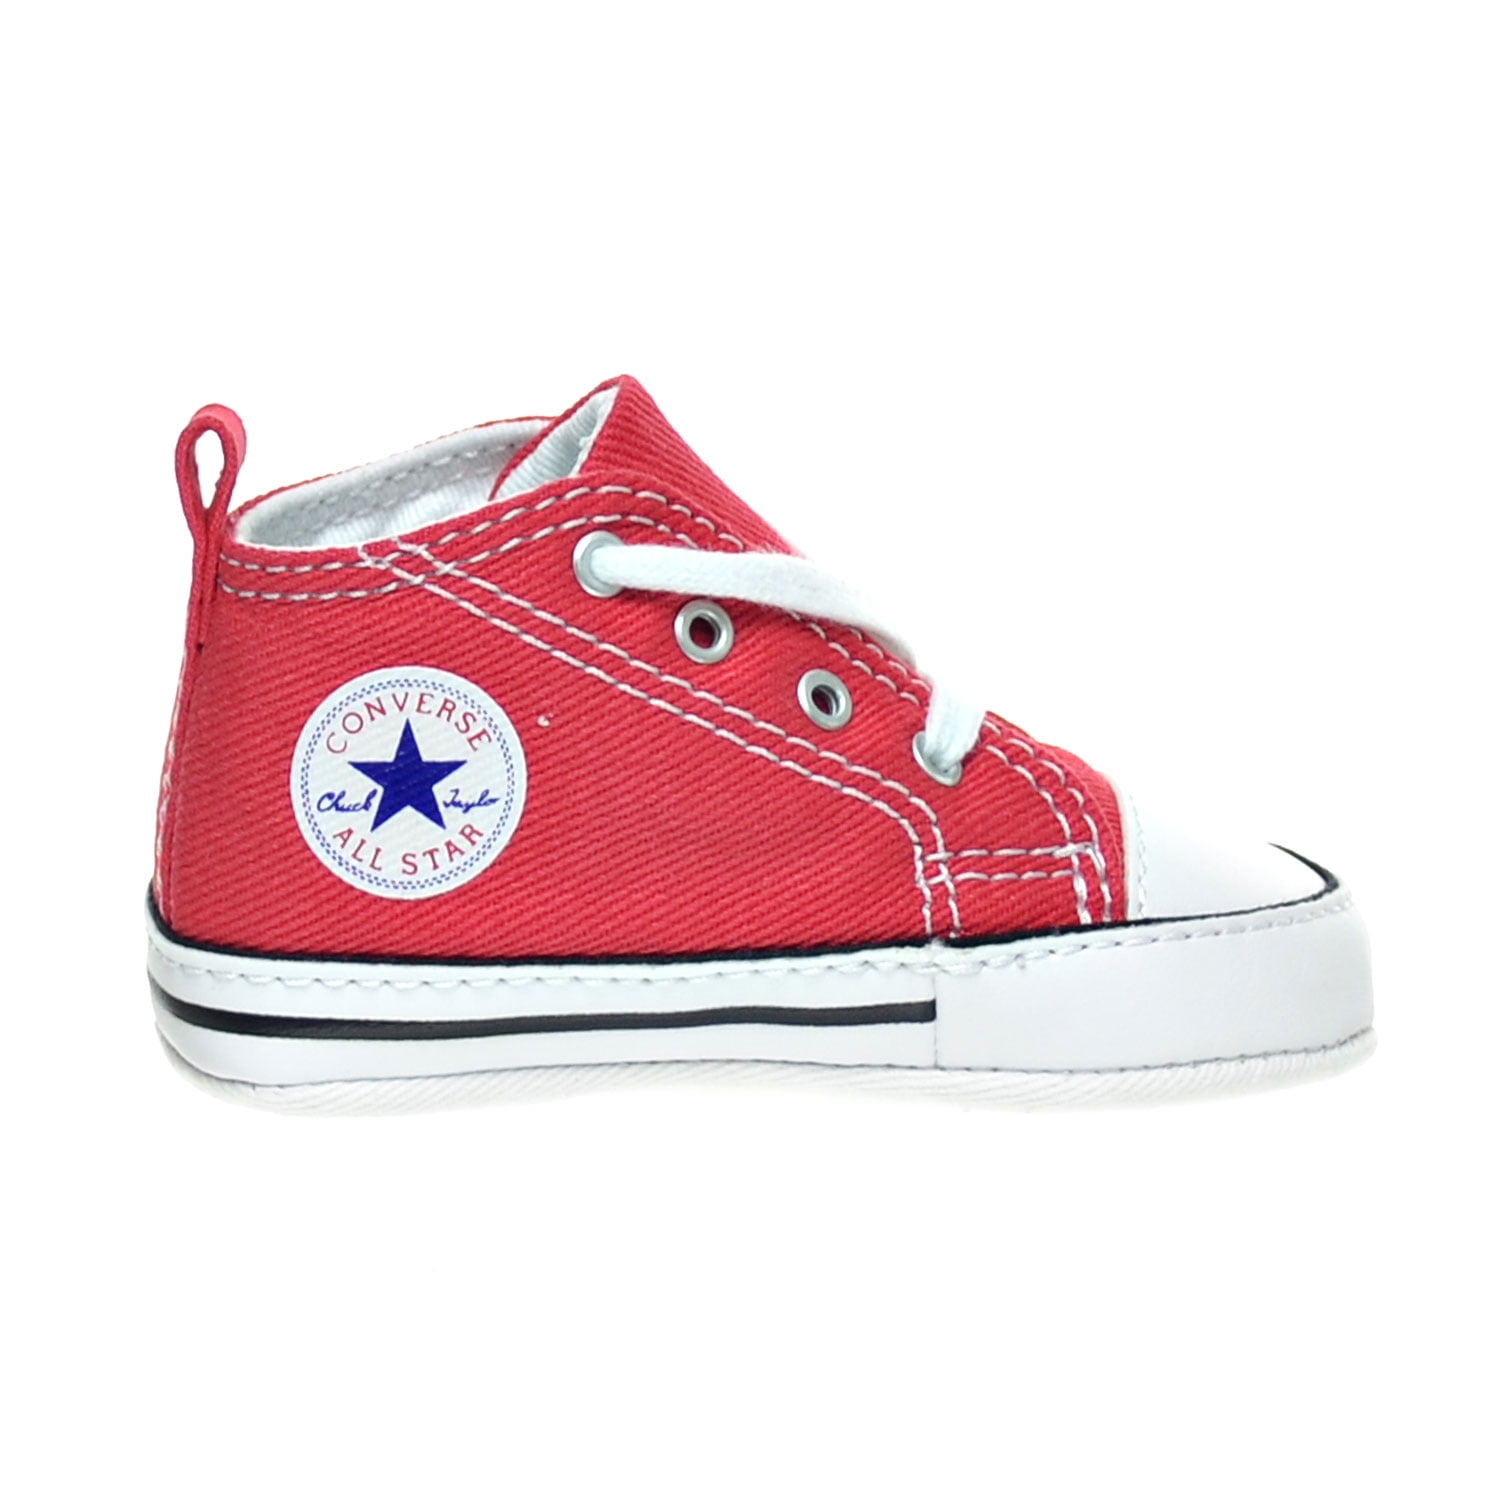 Converse Chuck Taylor Star Infants/Toddlers Shoes 88875 - Walmart.com